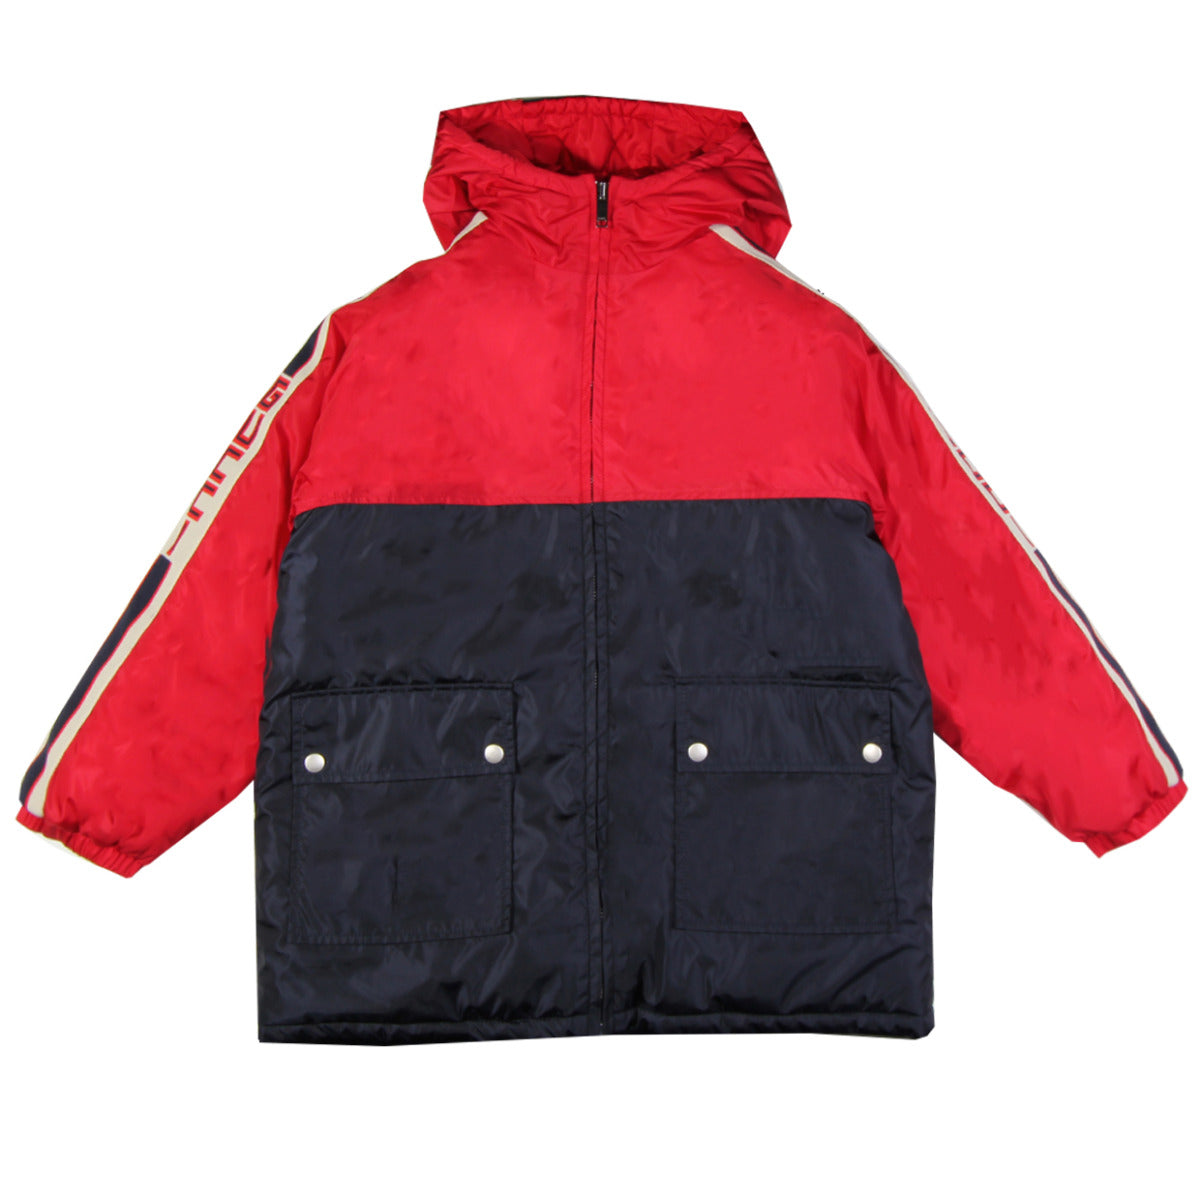 Gucci Kids Red Puffer Jacket front 